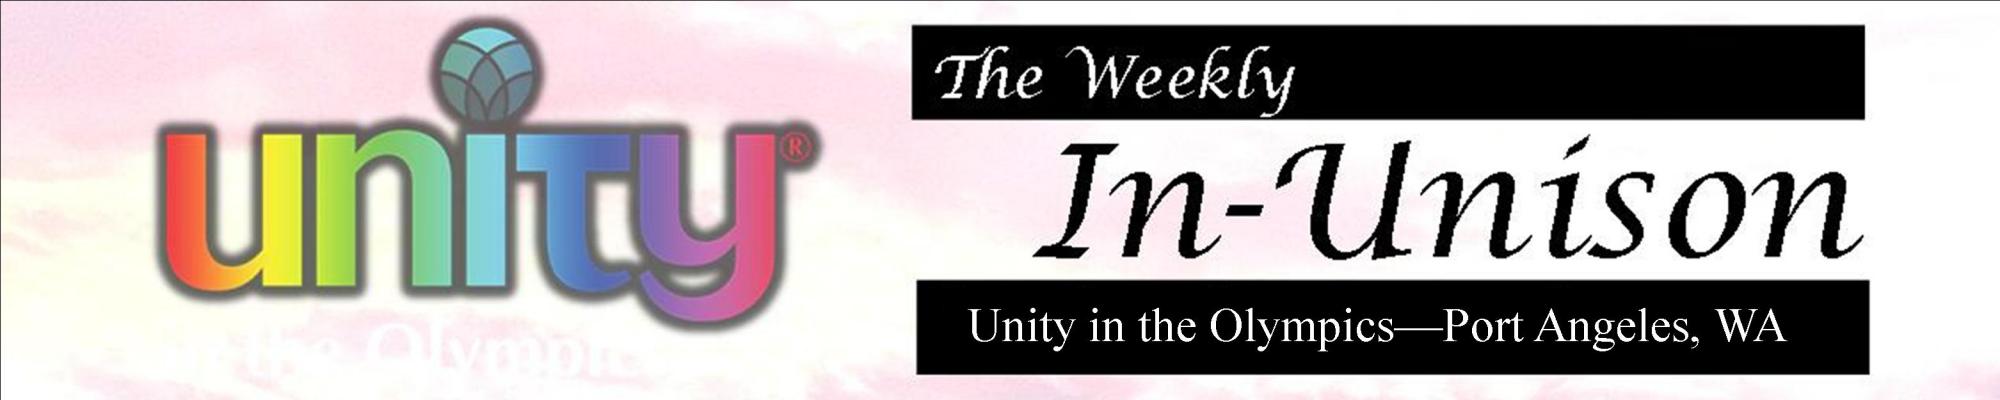 The Weekly IN-UNISON April 24, 2024 Edition